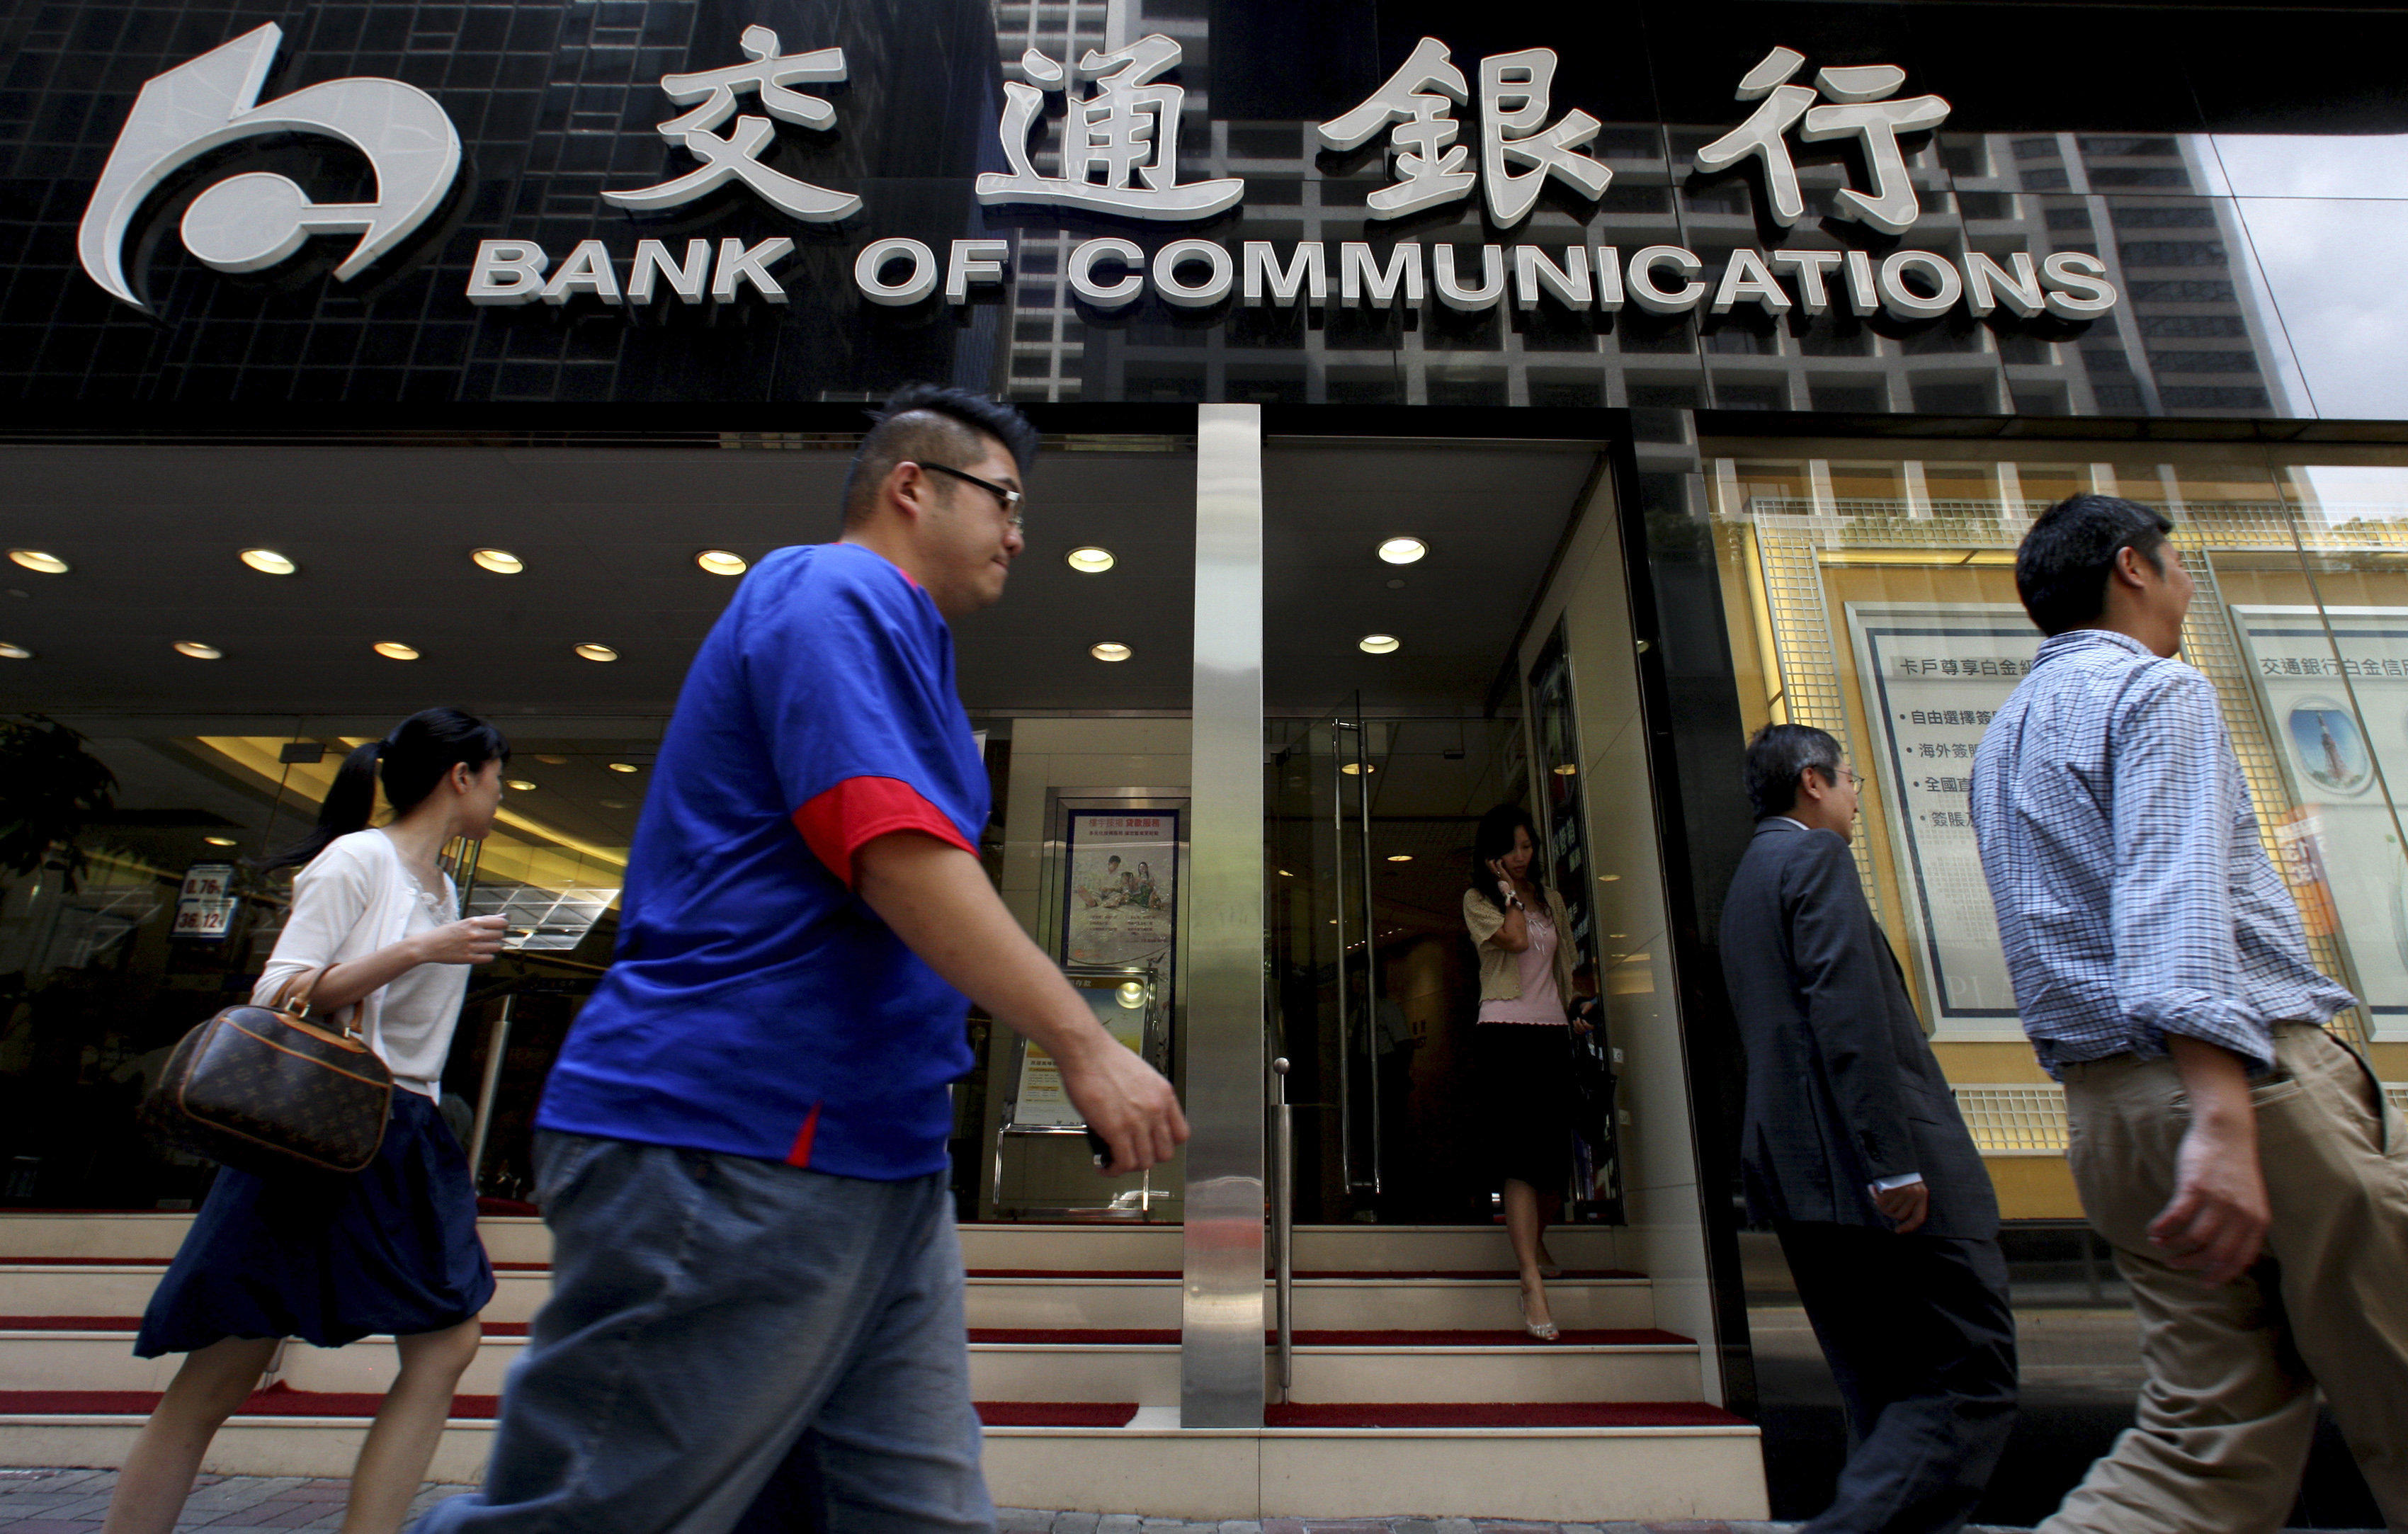 A Bank of Communications branch in Hong Kong. The bank says it has granted payment extensions worth US$393.4 million to some of its credit card customers. Photo: Reuters